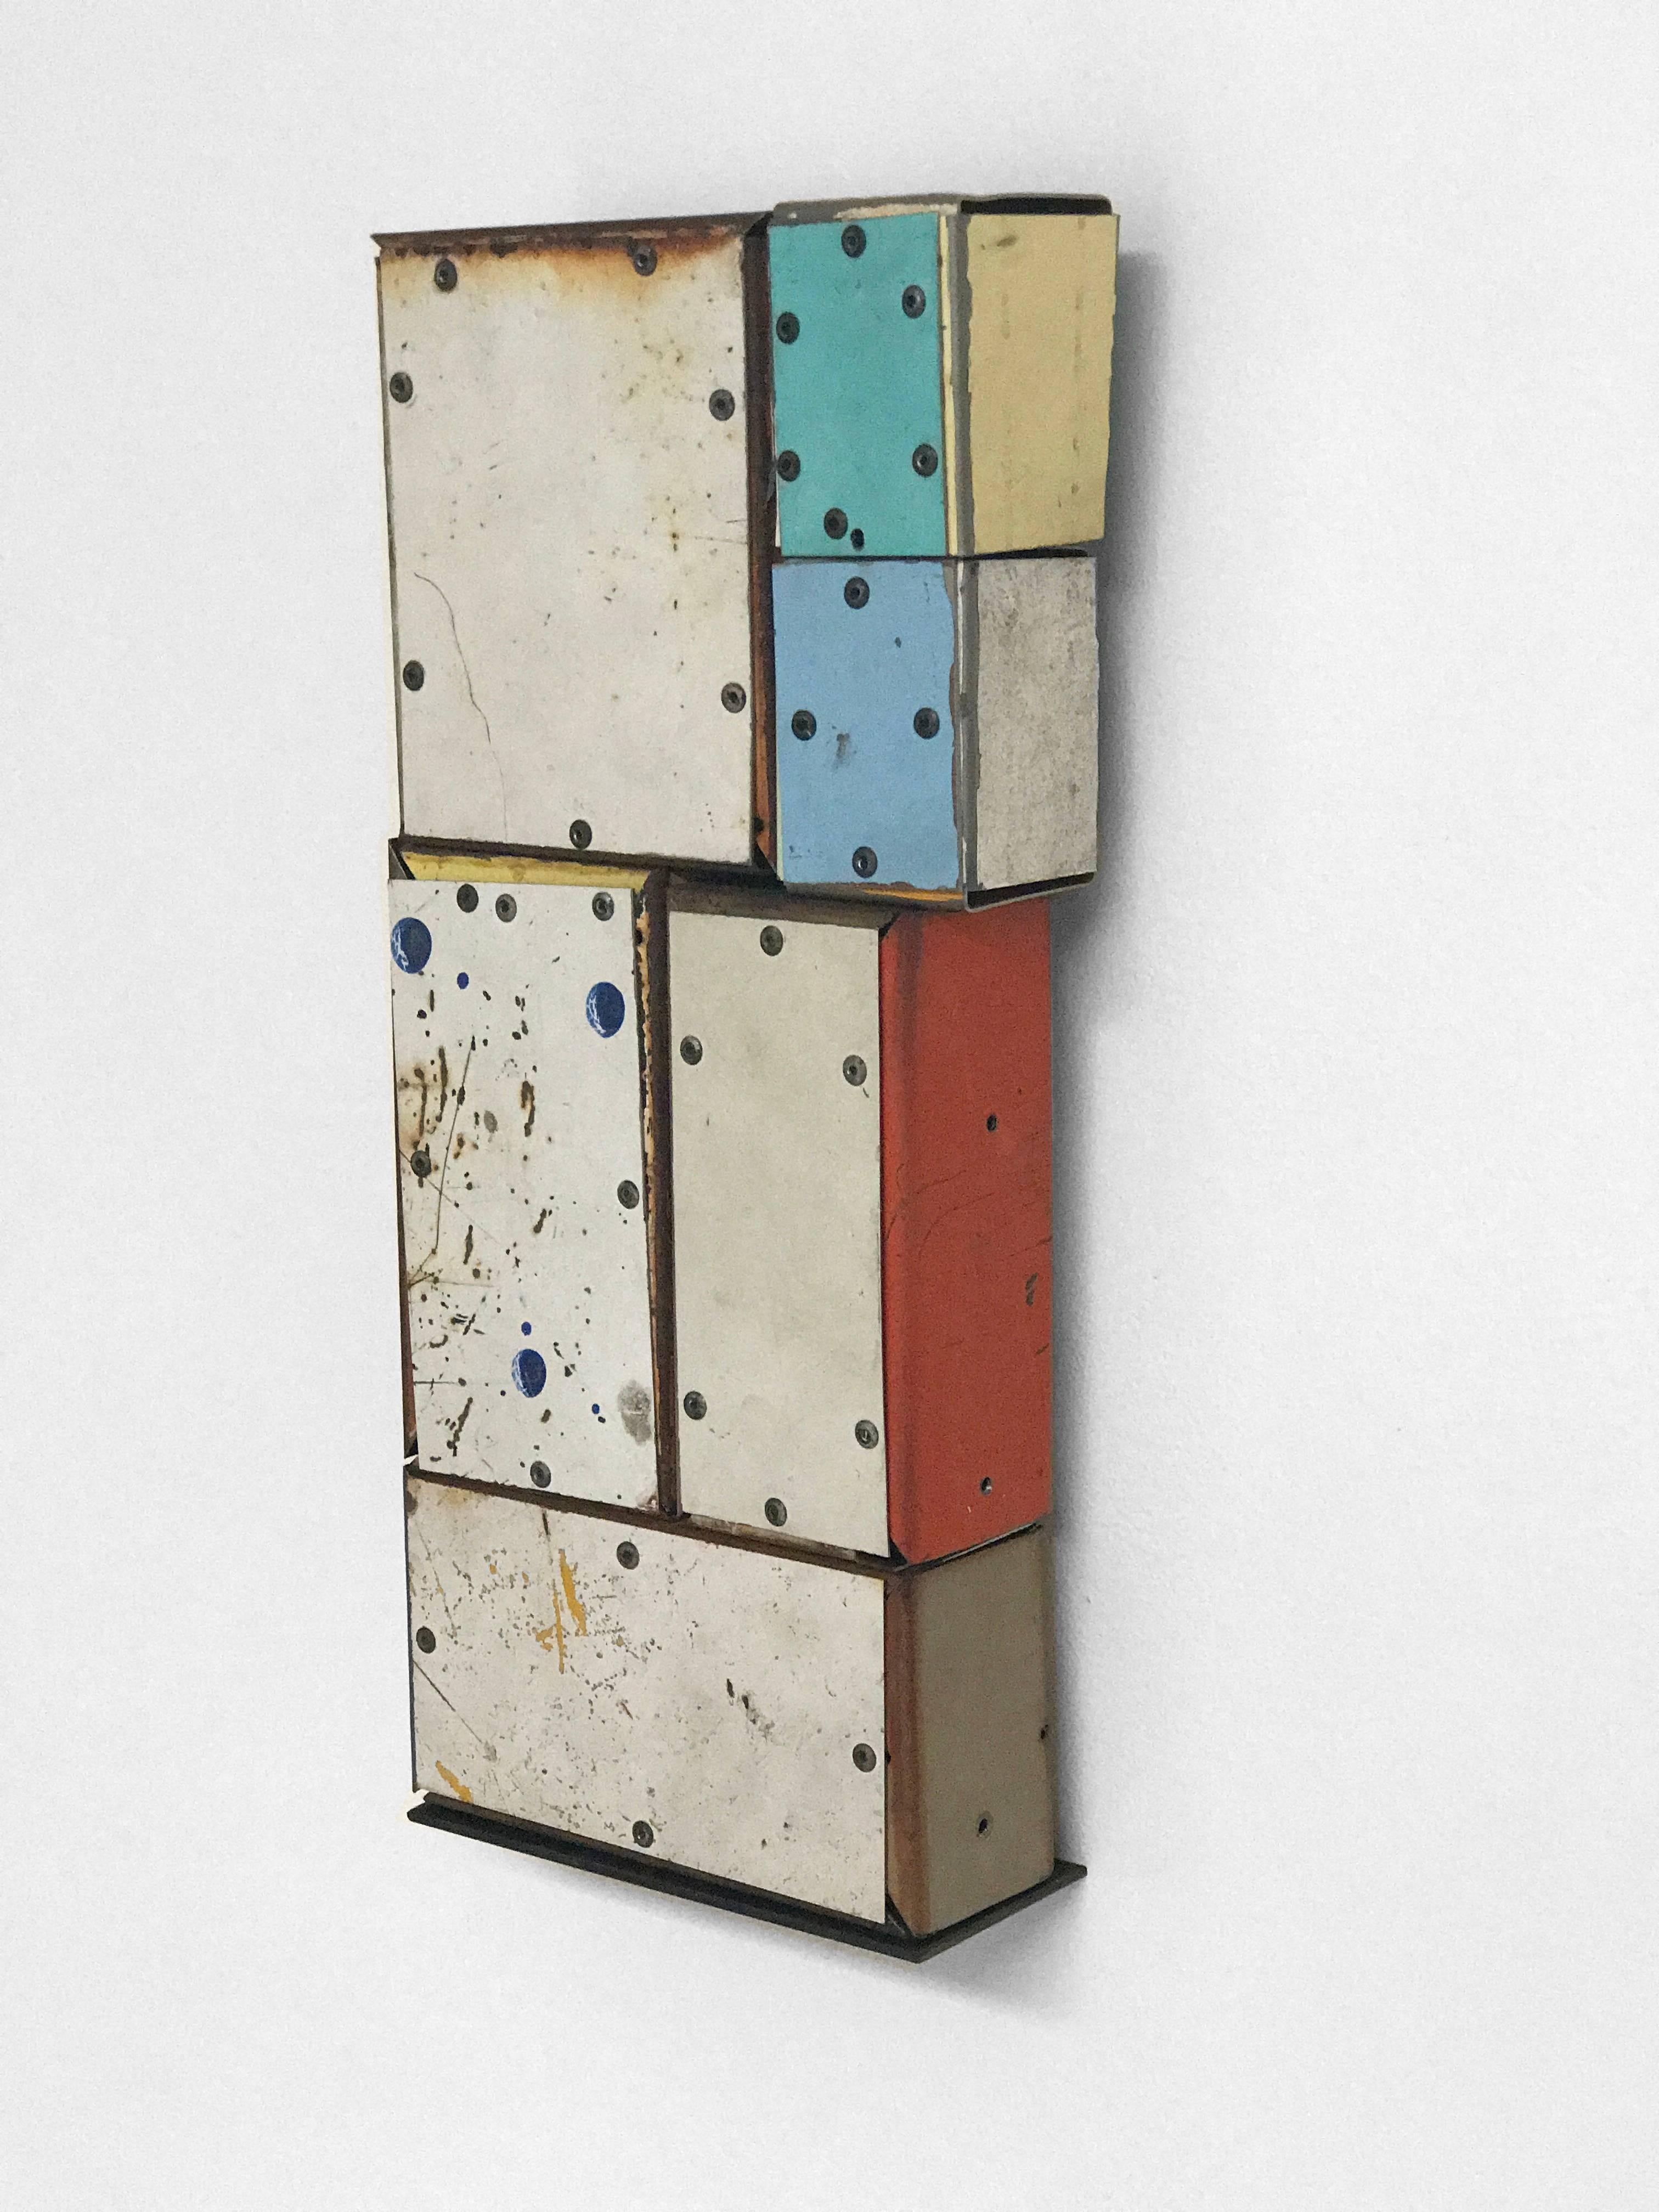 Ted Larsen's Long Shorts is a hard-edged sculptural, mixed media, painting. Primary colors include rustic whites and hues of blue, green, red, taupe and yellow. New Routine is Constructivist, Bauhaus, Abstract Geometric, Contemporary and Cubist